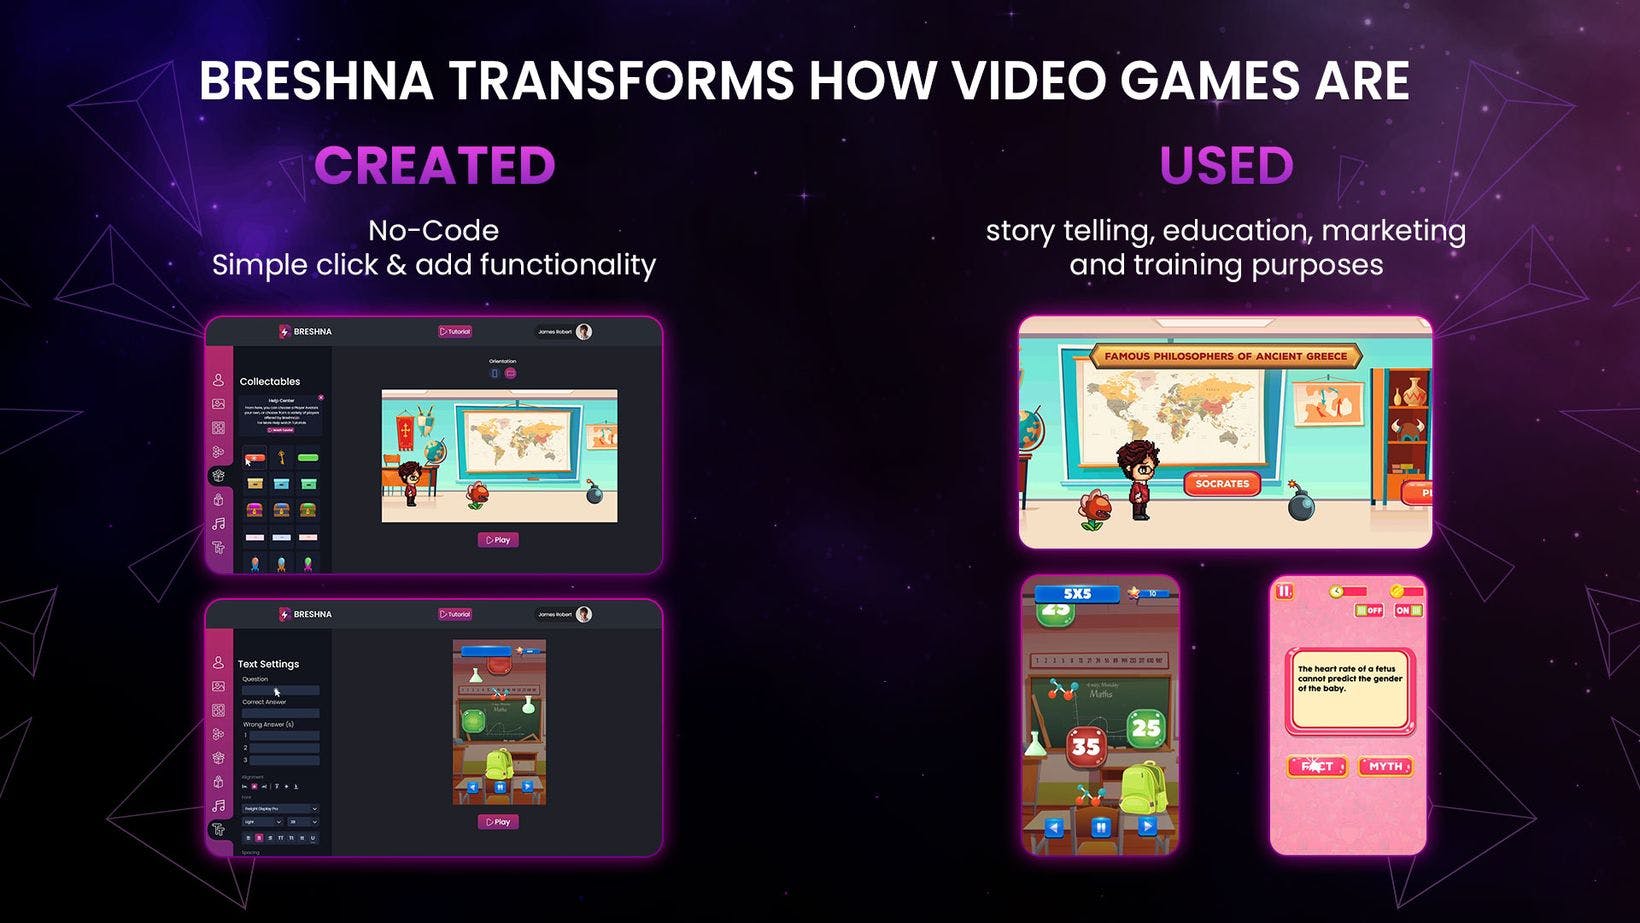 Breshna changes how games are created and used (more detail) graphic!